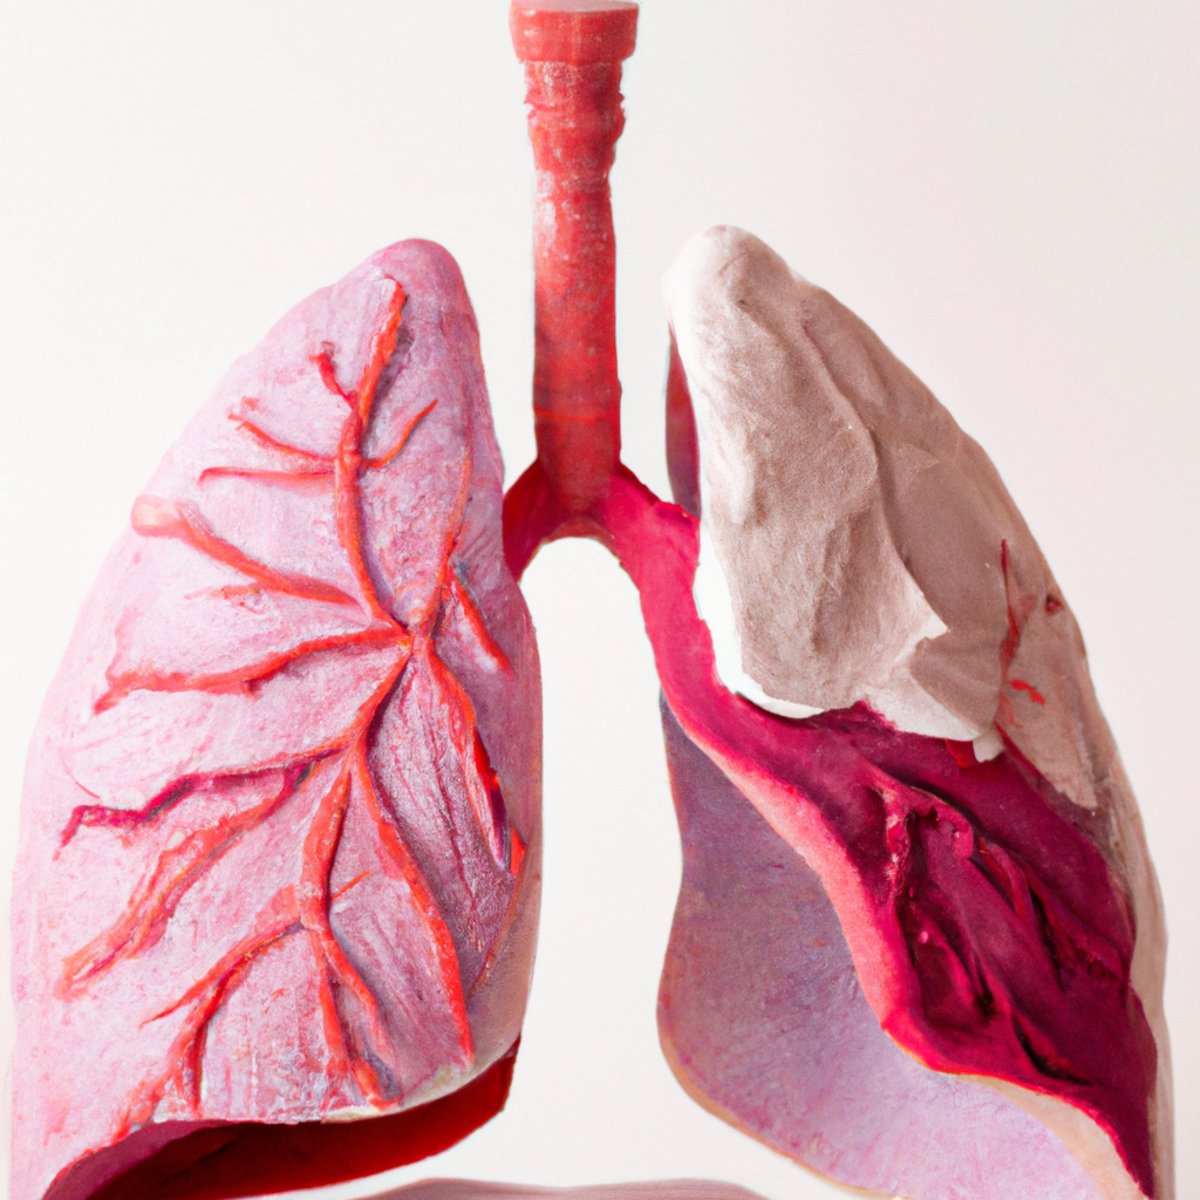 Detailed lung models, one healthy, one with Desquamative Interstitial Pneumonia (DIP), with medication and stethoscope.